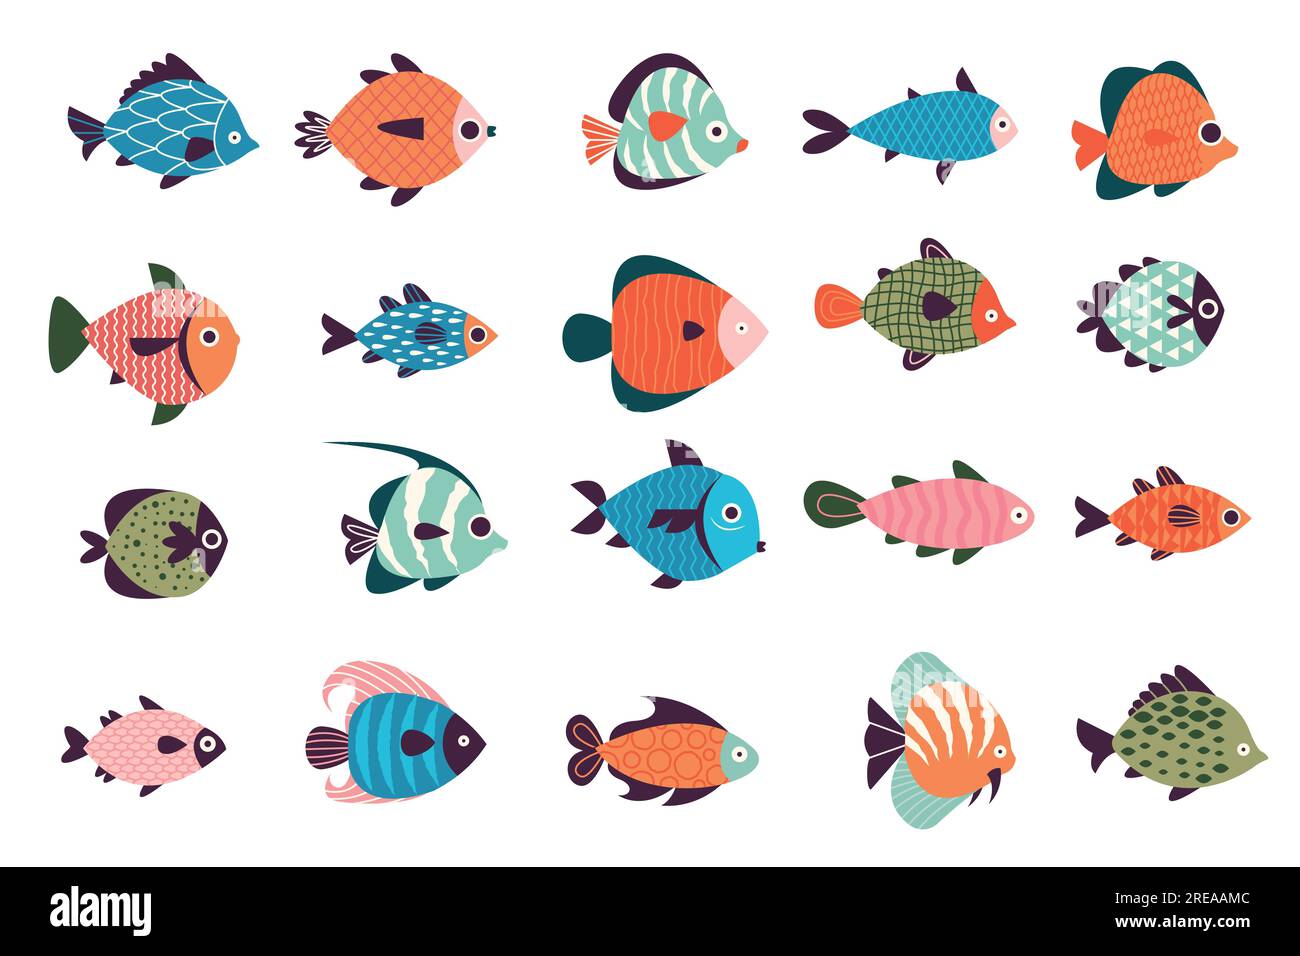 Exotic fish collection. Cartoon marine underwater wildlife, colorful ocean life characters, fish zoo decor and wildlife concept. Vector set Stock Vector